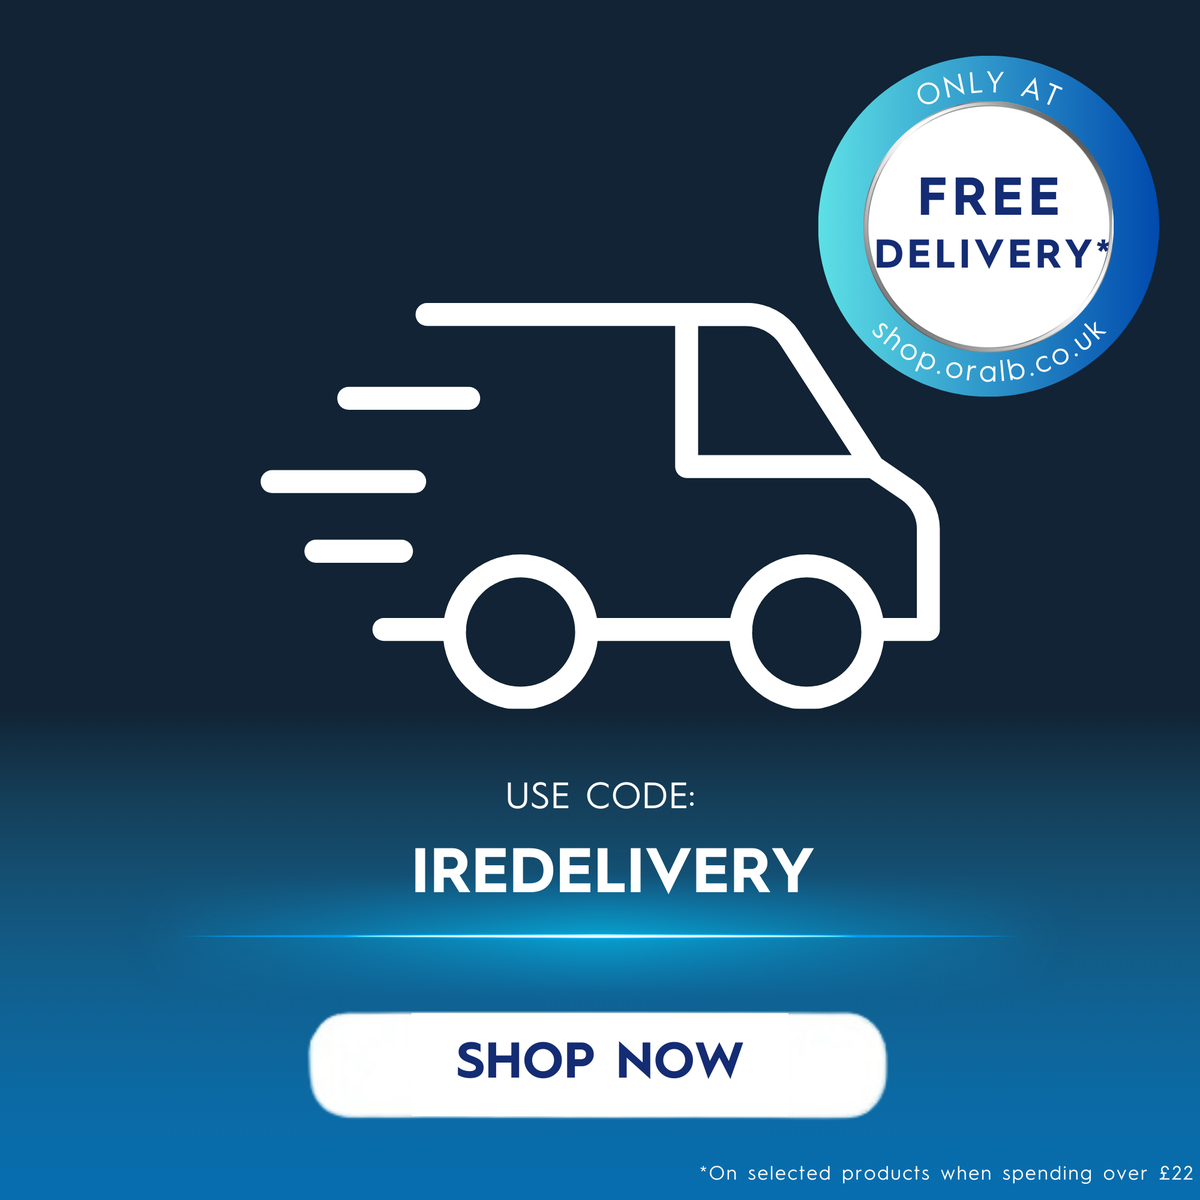 🚚 Shop our BEST product deals & enjoy FREE delivery | USE CODE: IREDELIVERY